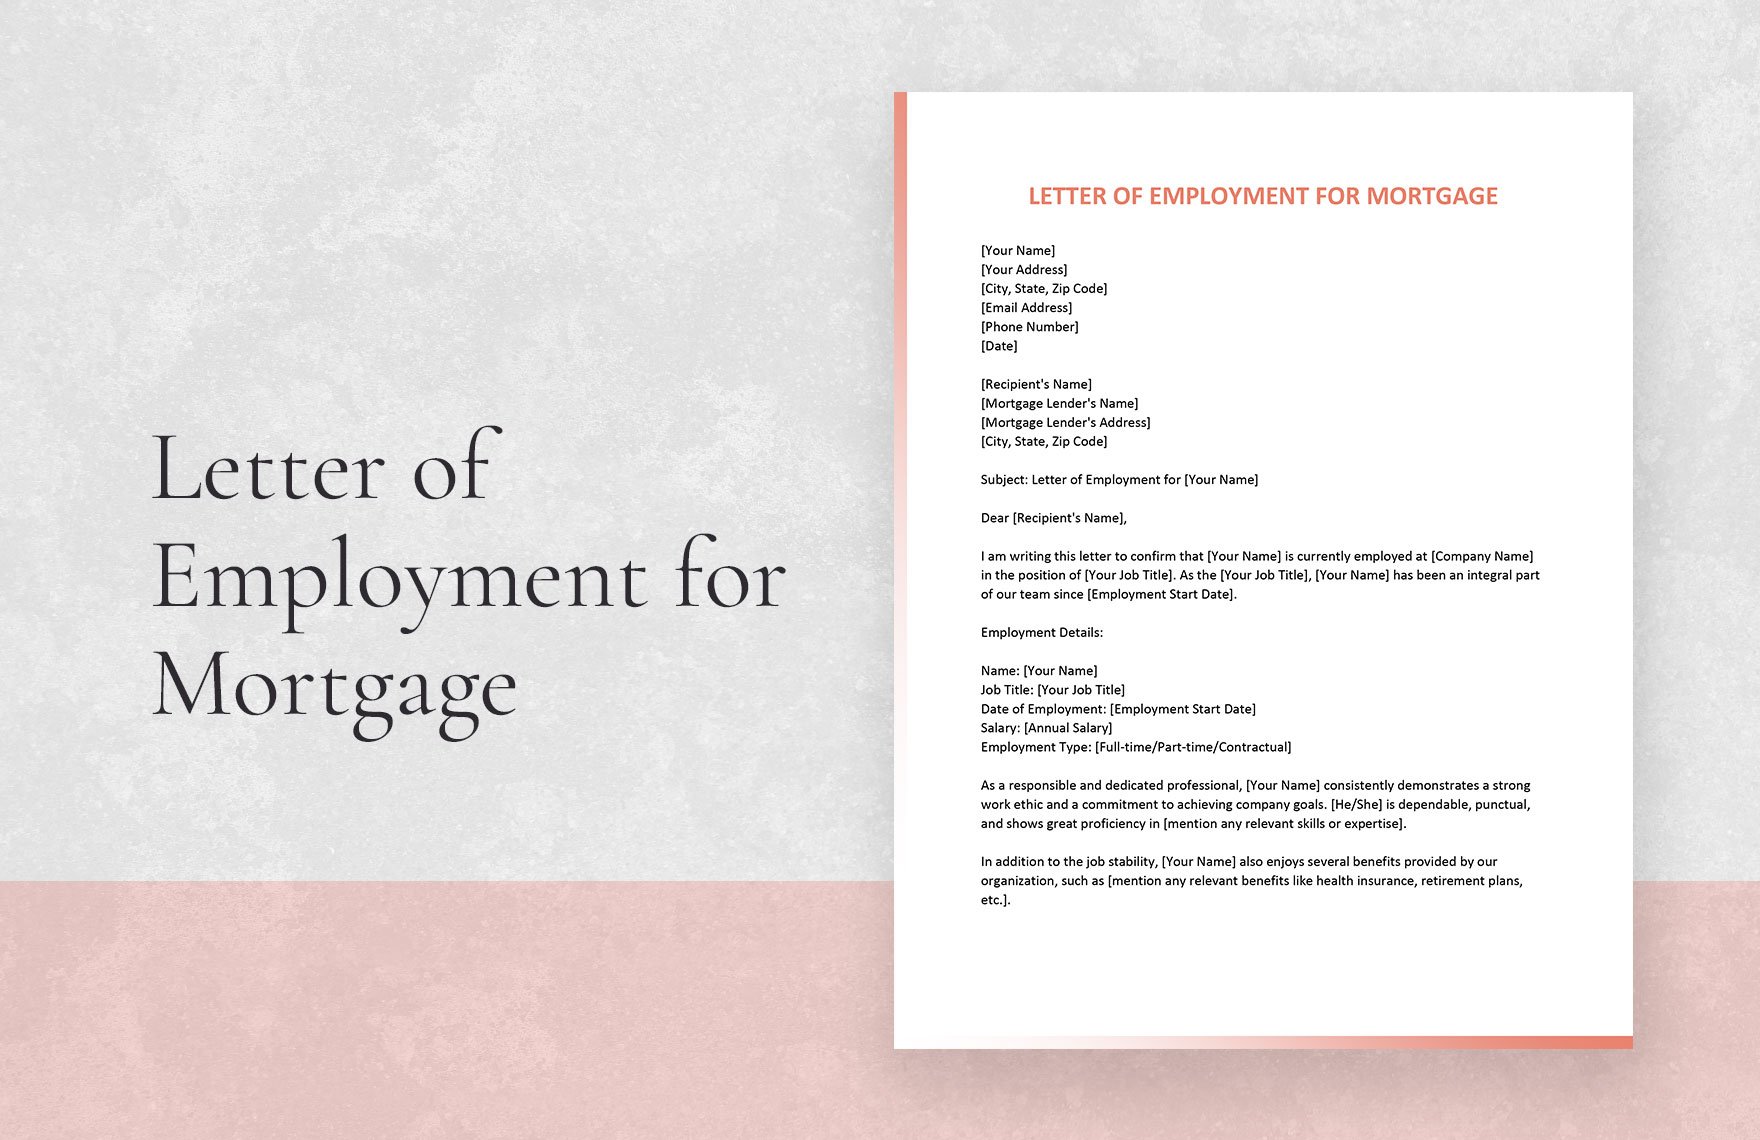 Letter of Employment for Mortgage